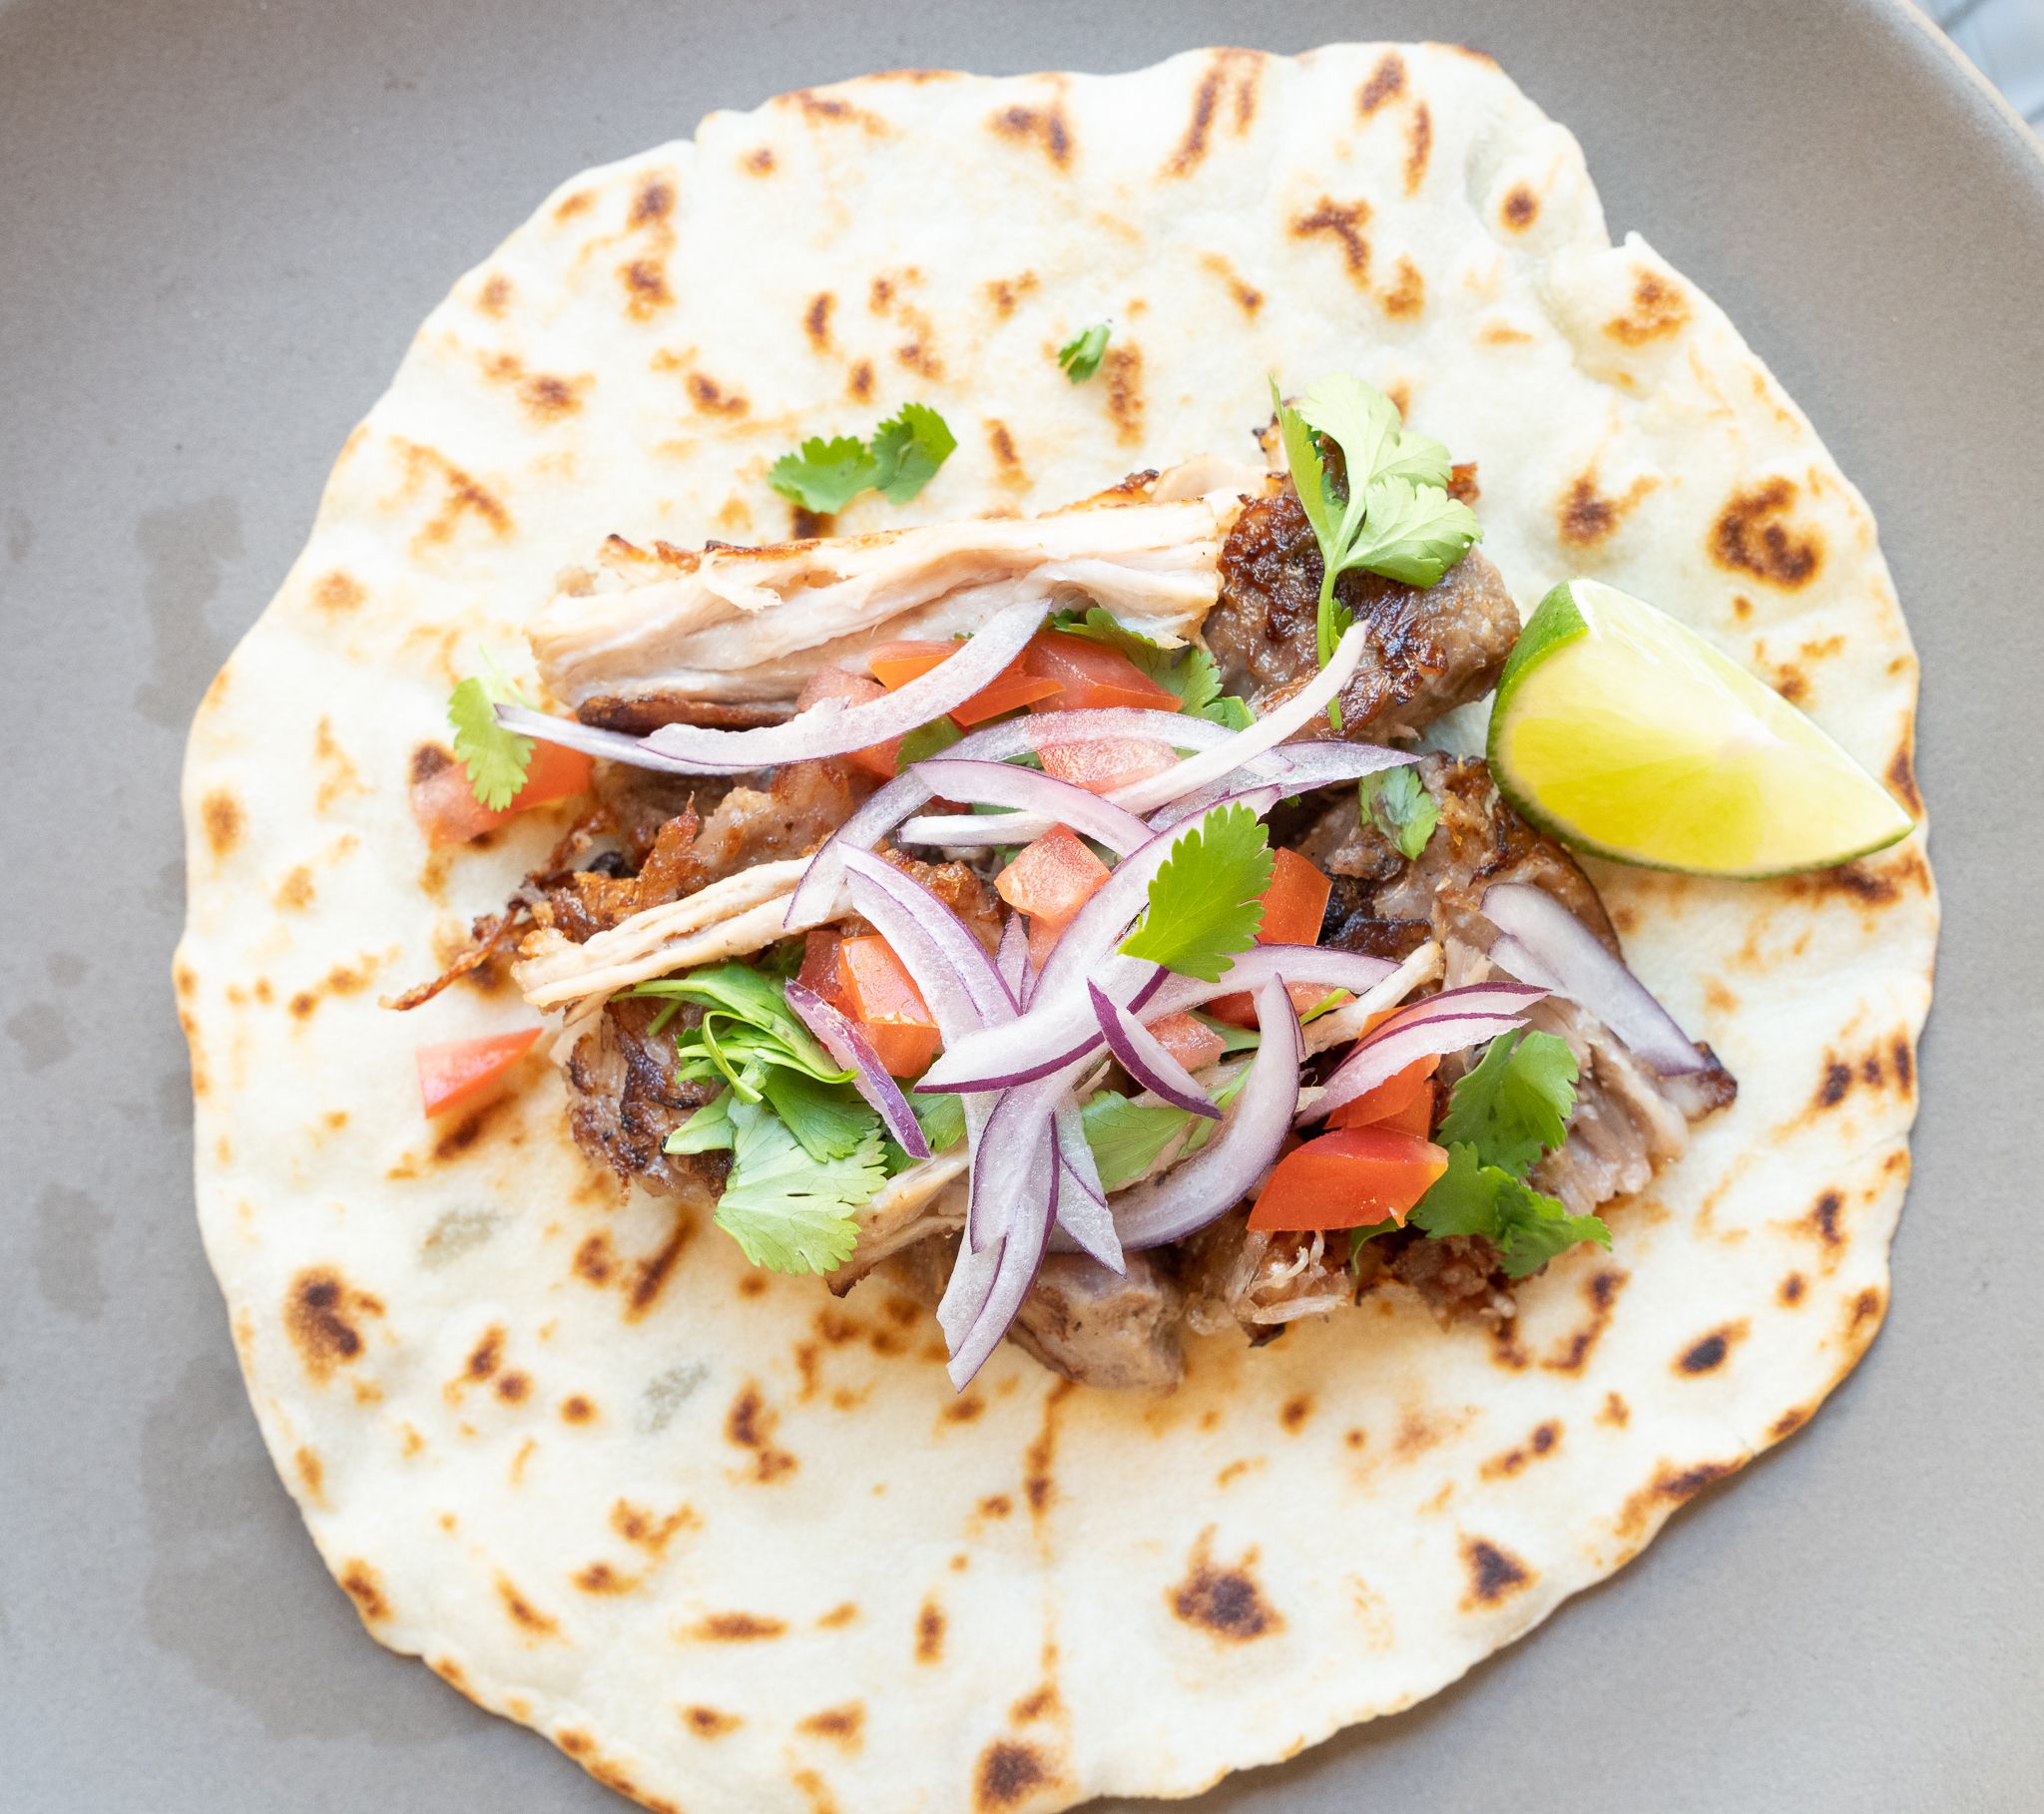 For Cinco de Mayo, Coast Packing Offers Recipe for Tortillas and Carnitas That Promises Amazing Flavors (Thanks to Lard) 